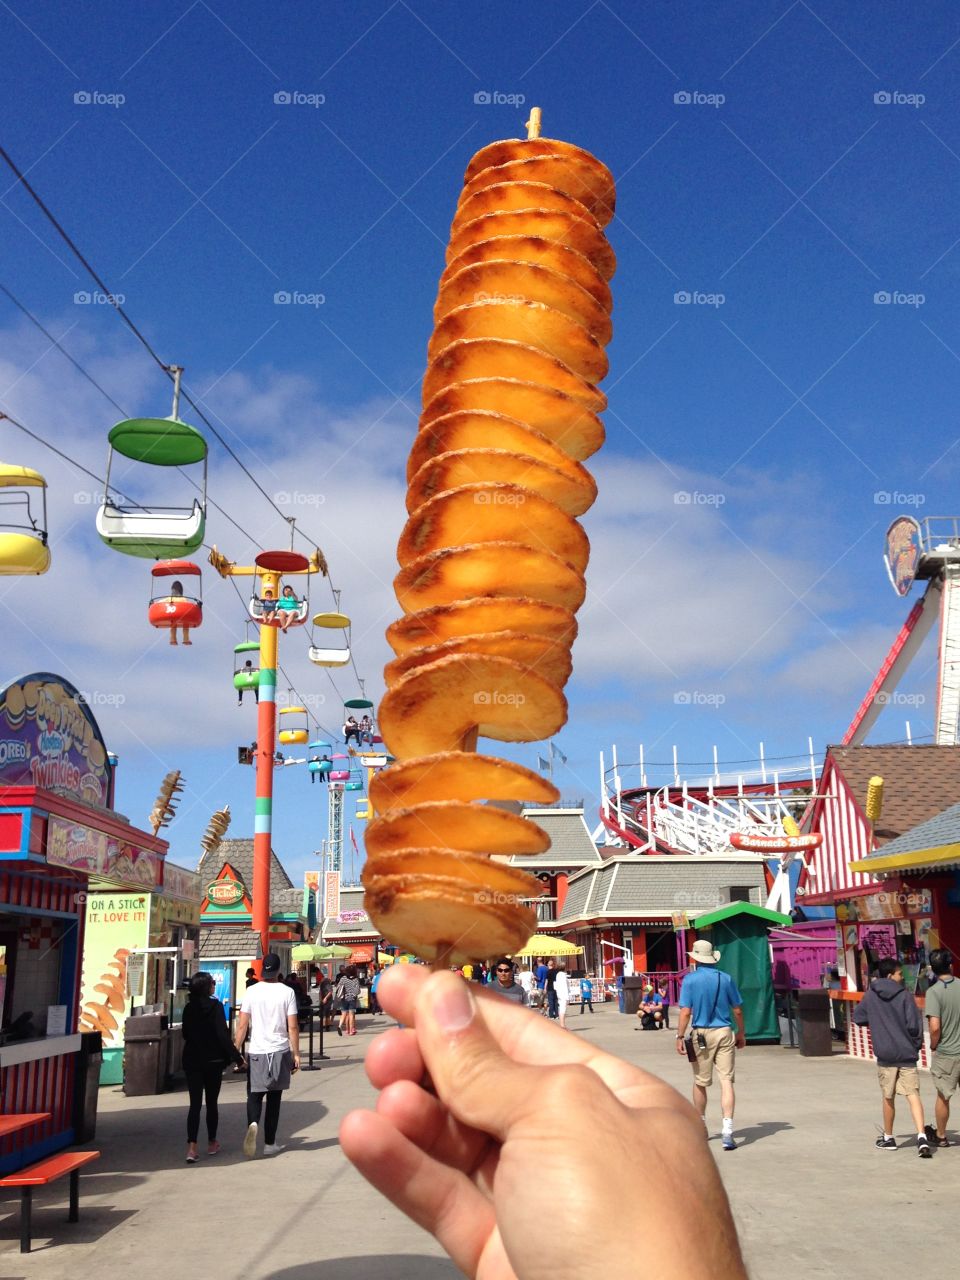 A delicious street food at the amusement park
